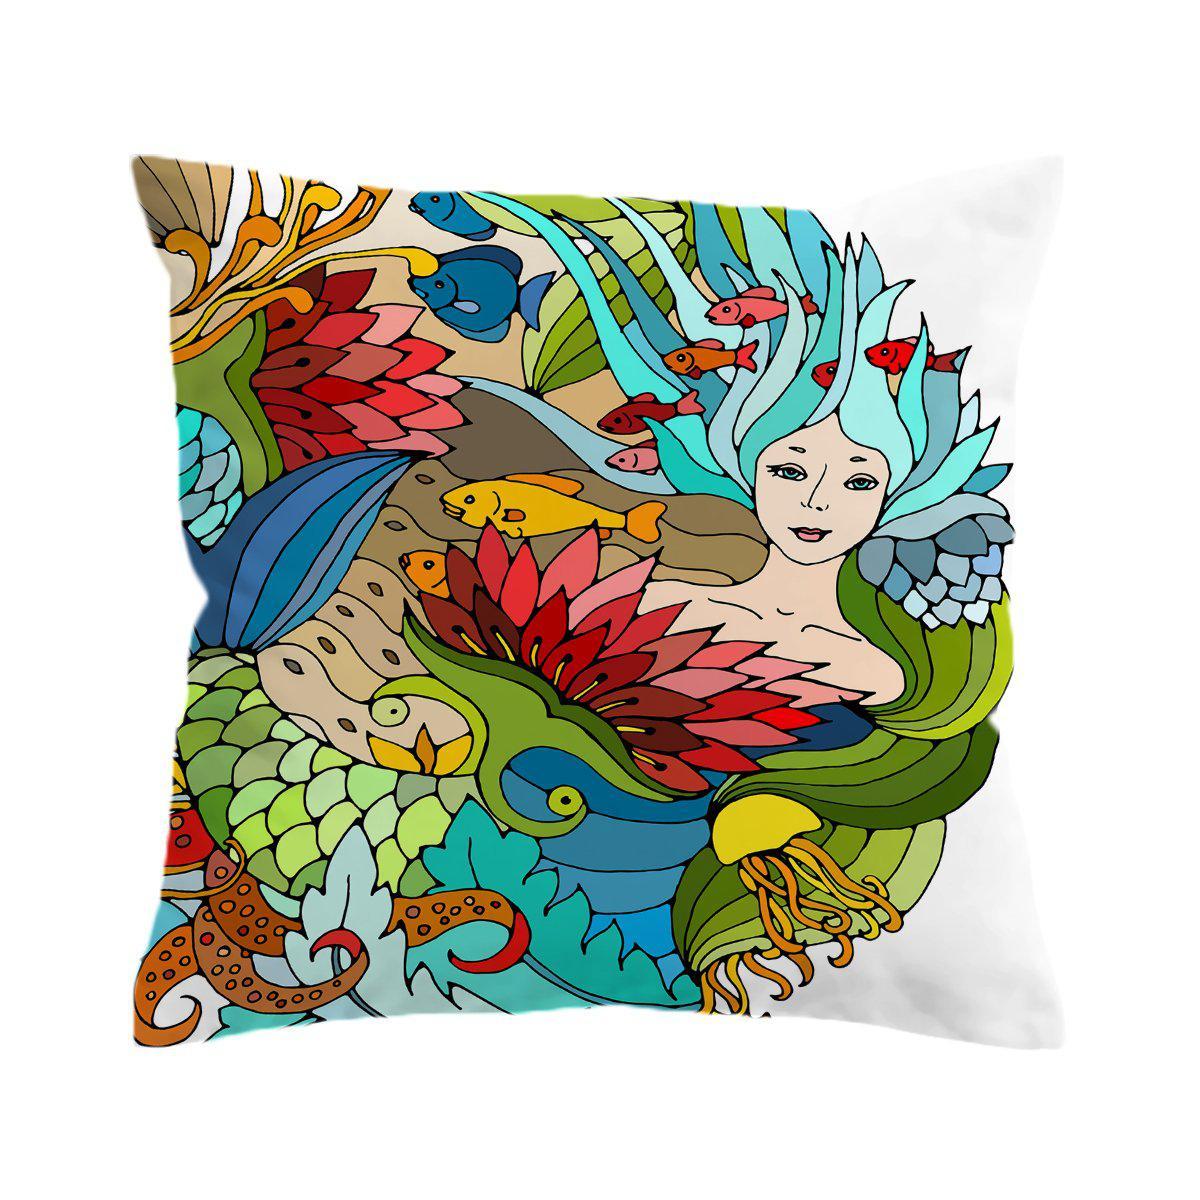 The Happy Mermaid Pillow Cover